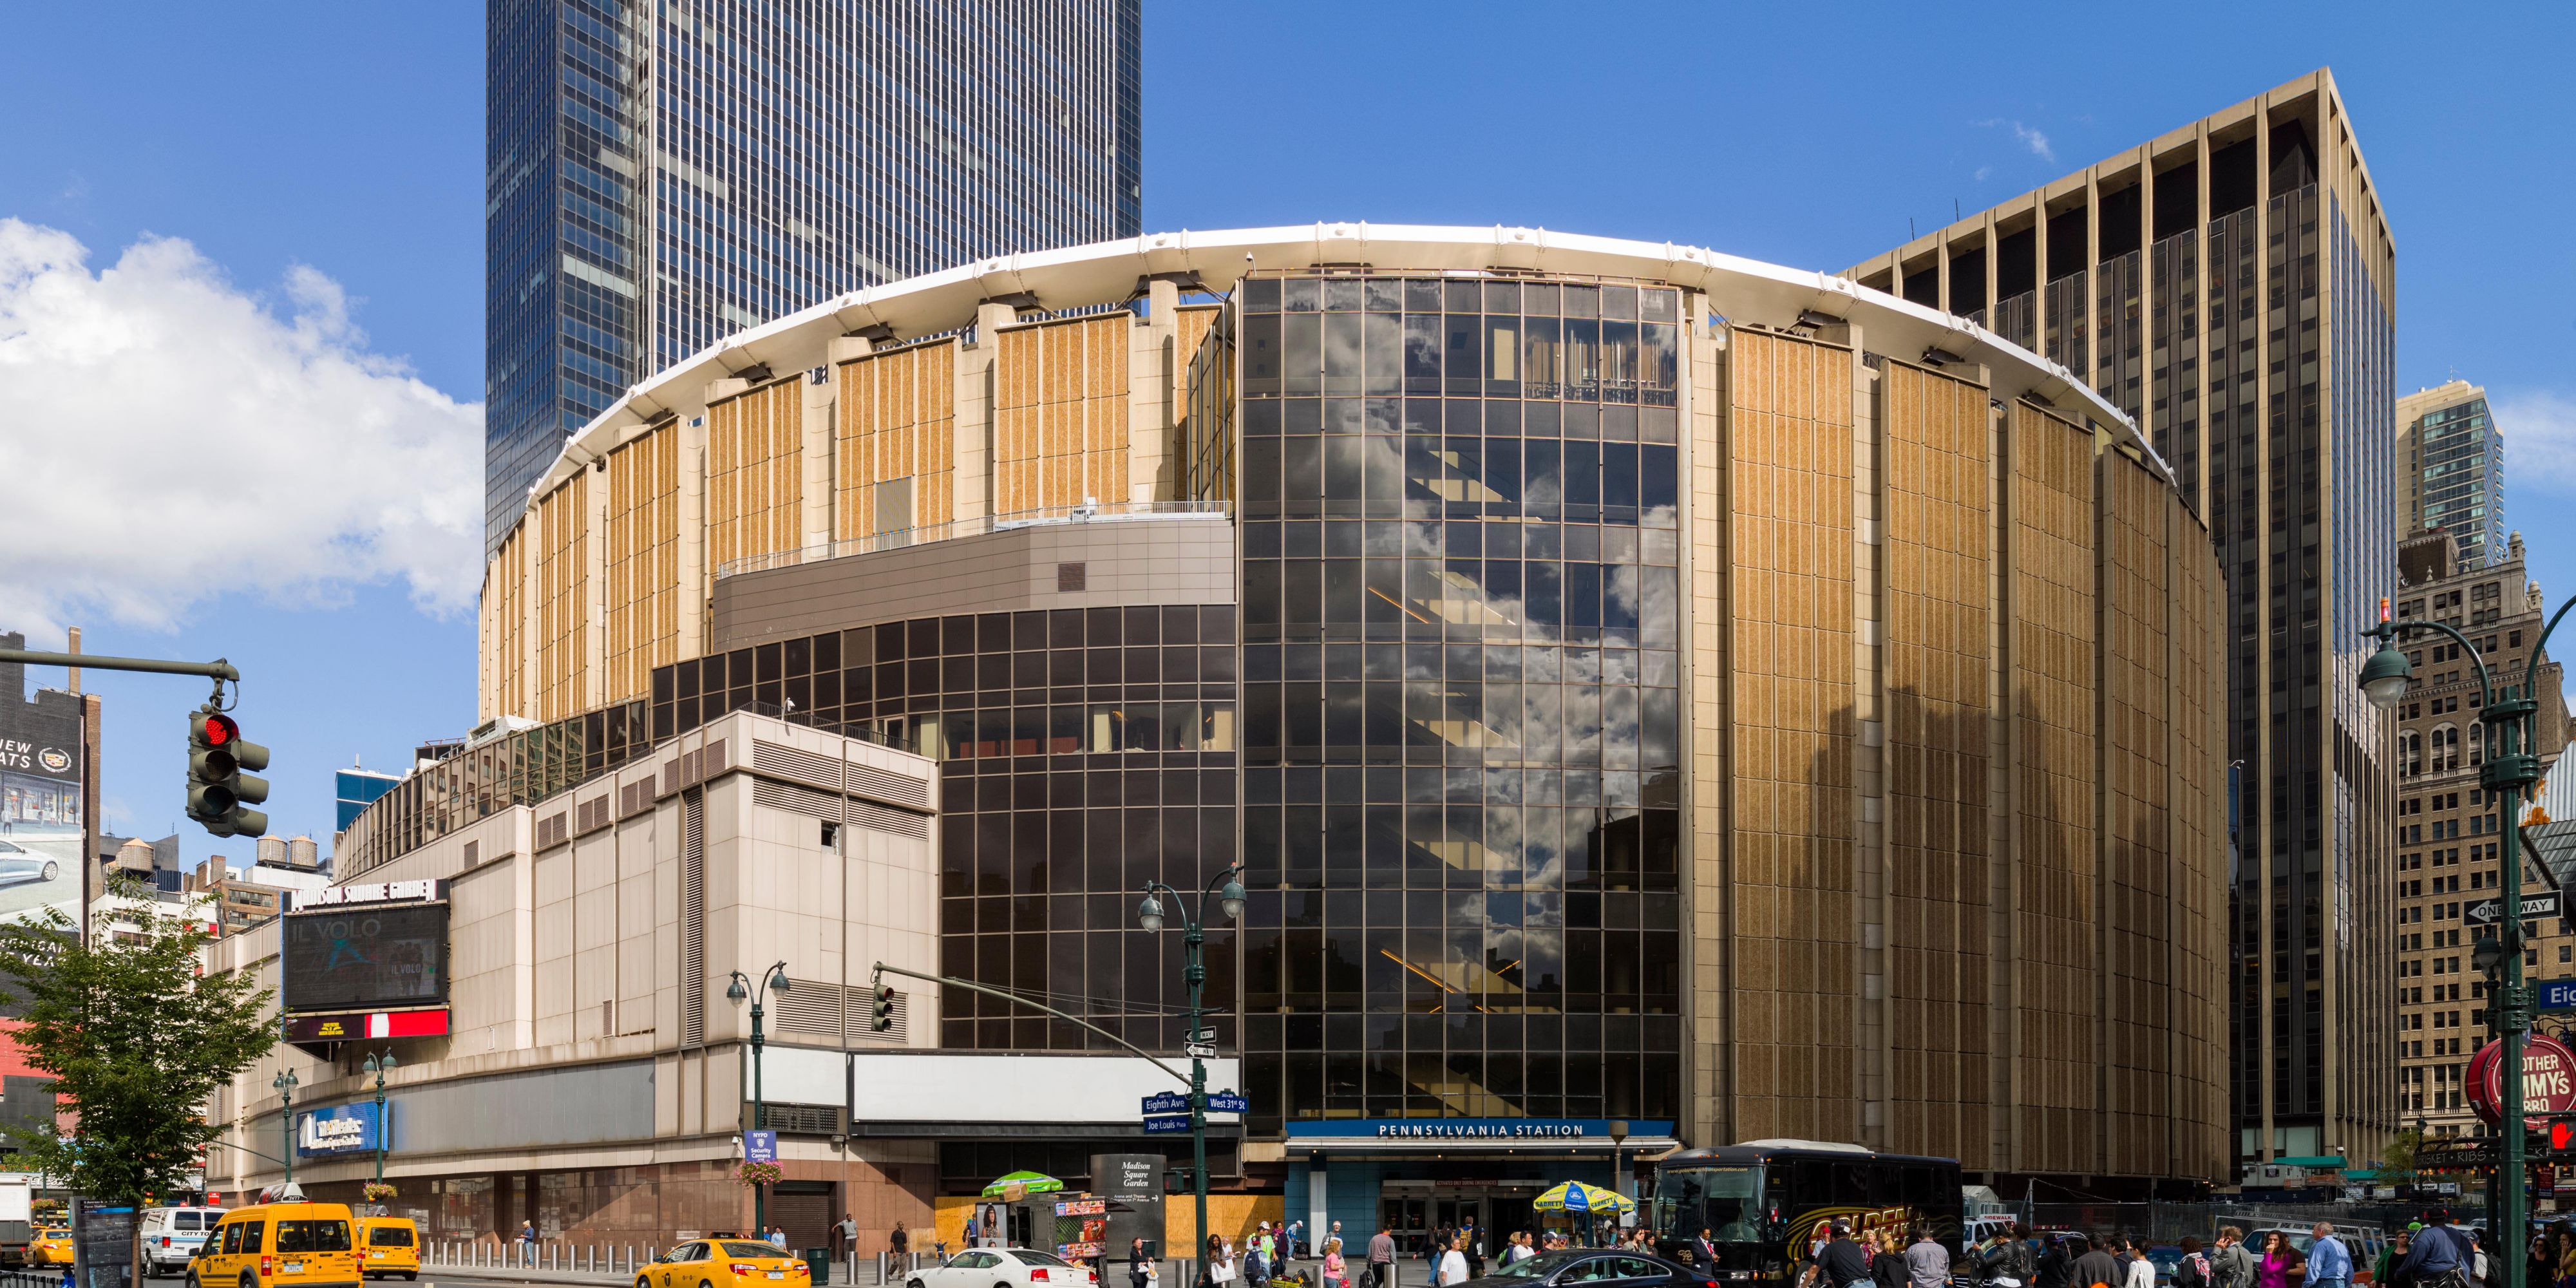 Whether attending a concert or sporting event, Madison Square Garden is a must-see attraction!